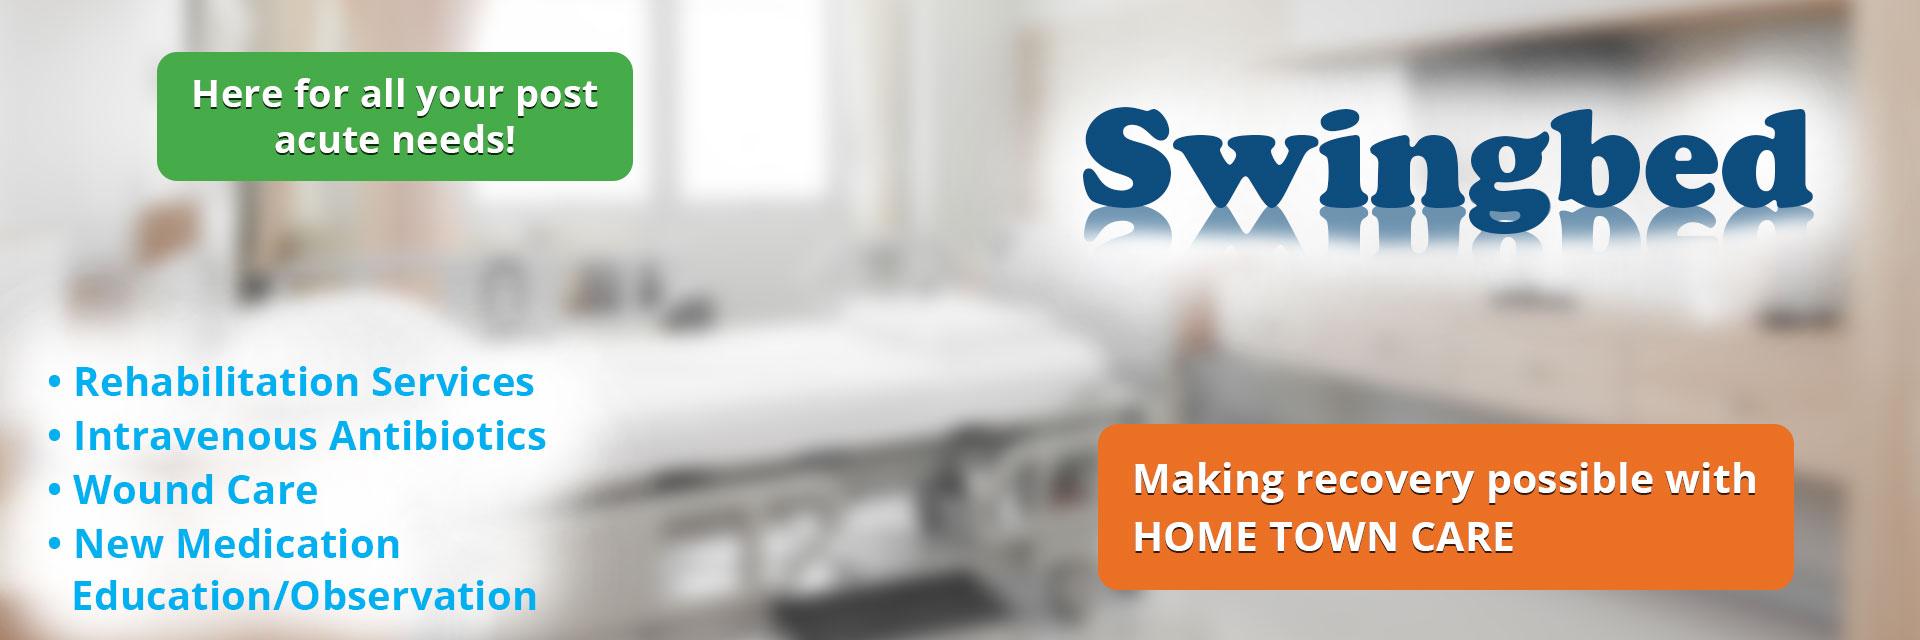 Swingbed

Here for all your post acute needs!

* Rehabilitation Services
* Intravenous Antibiotics
* Wound Care
* New Medication Education/Observation

Making recovery possible with HOME TOWN CARE